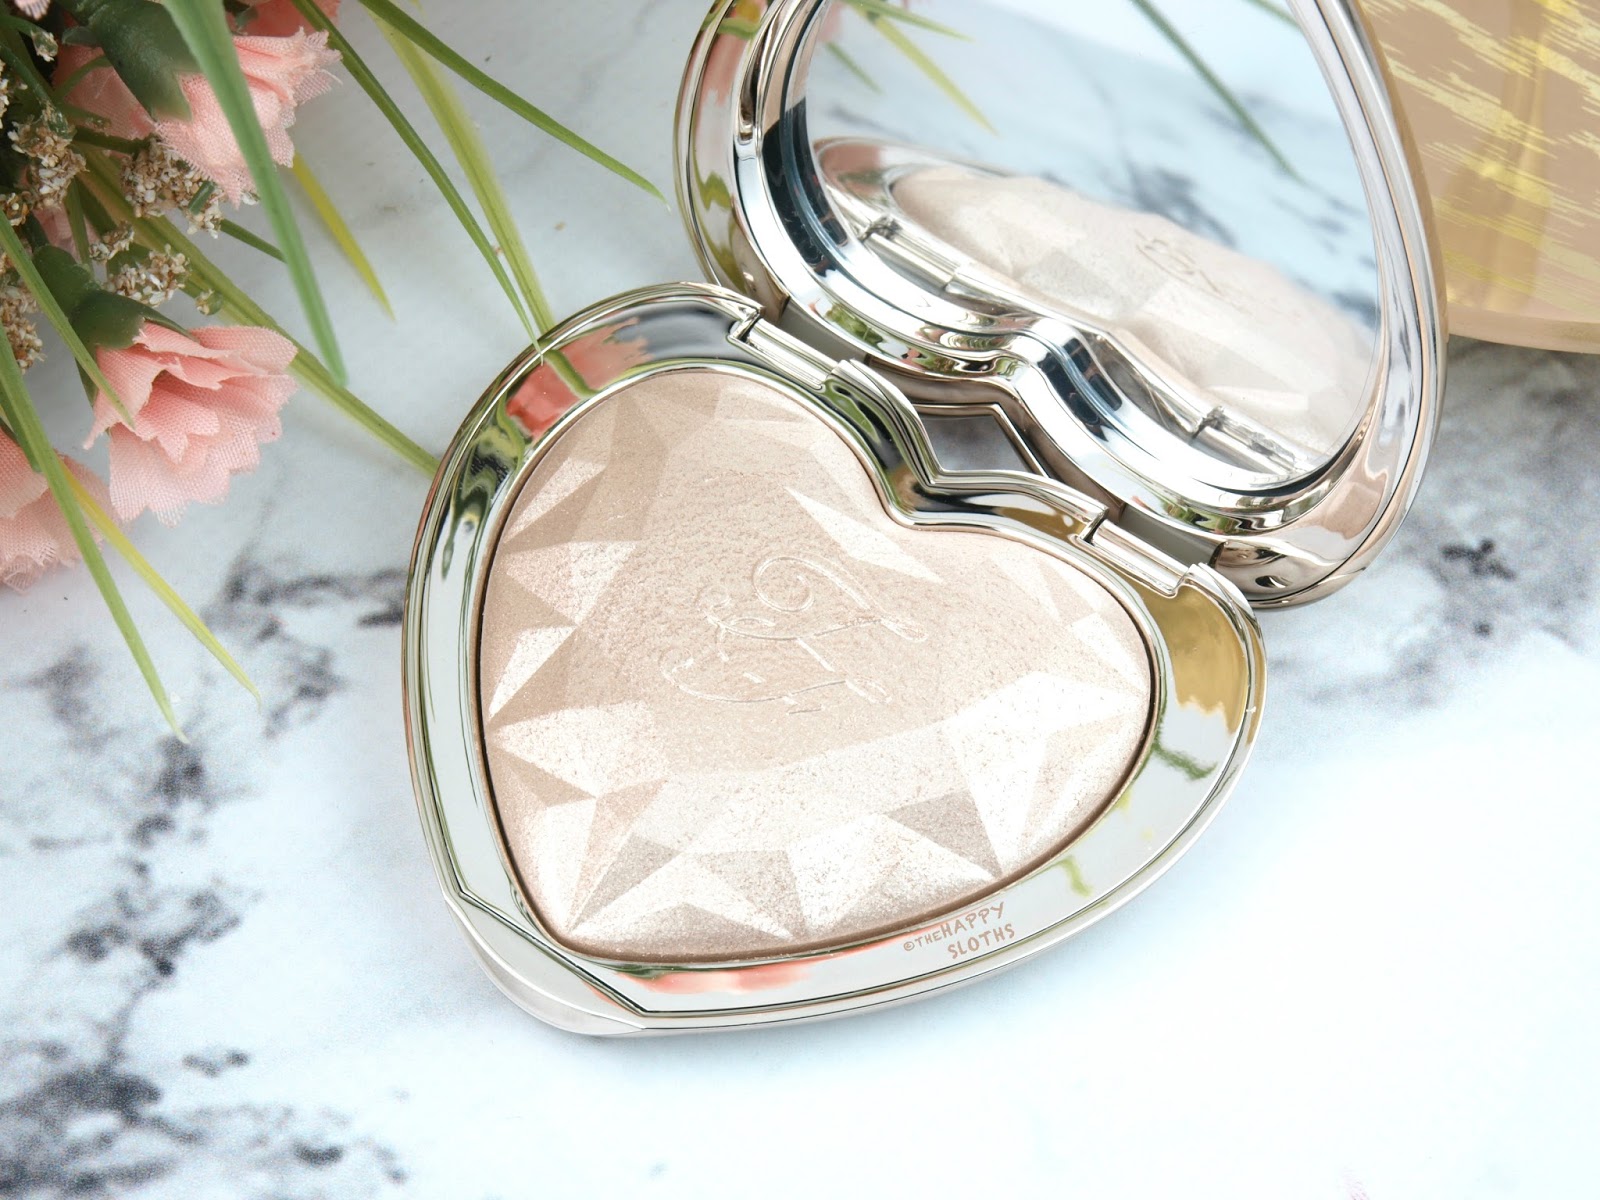 Too Faced Love Light Prismatic Highlighter in "Blinded by the Light": Review and Swatches